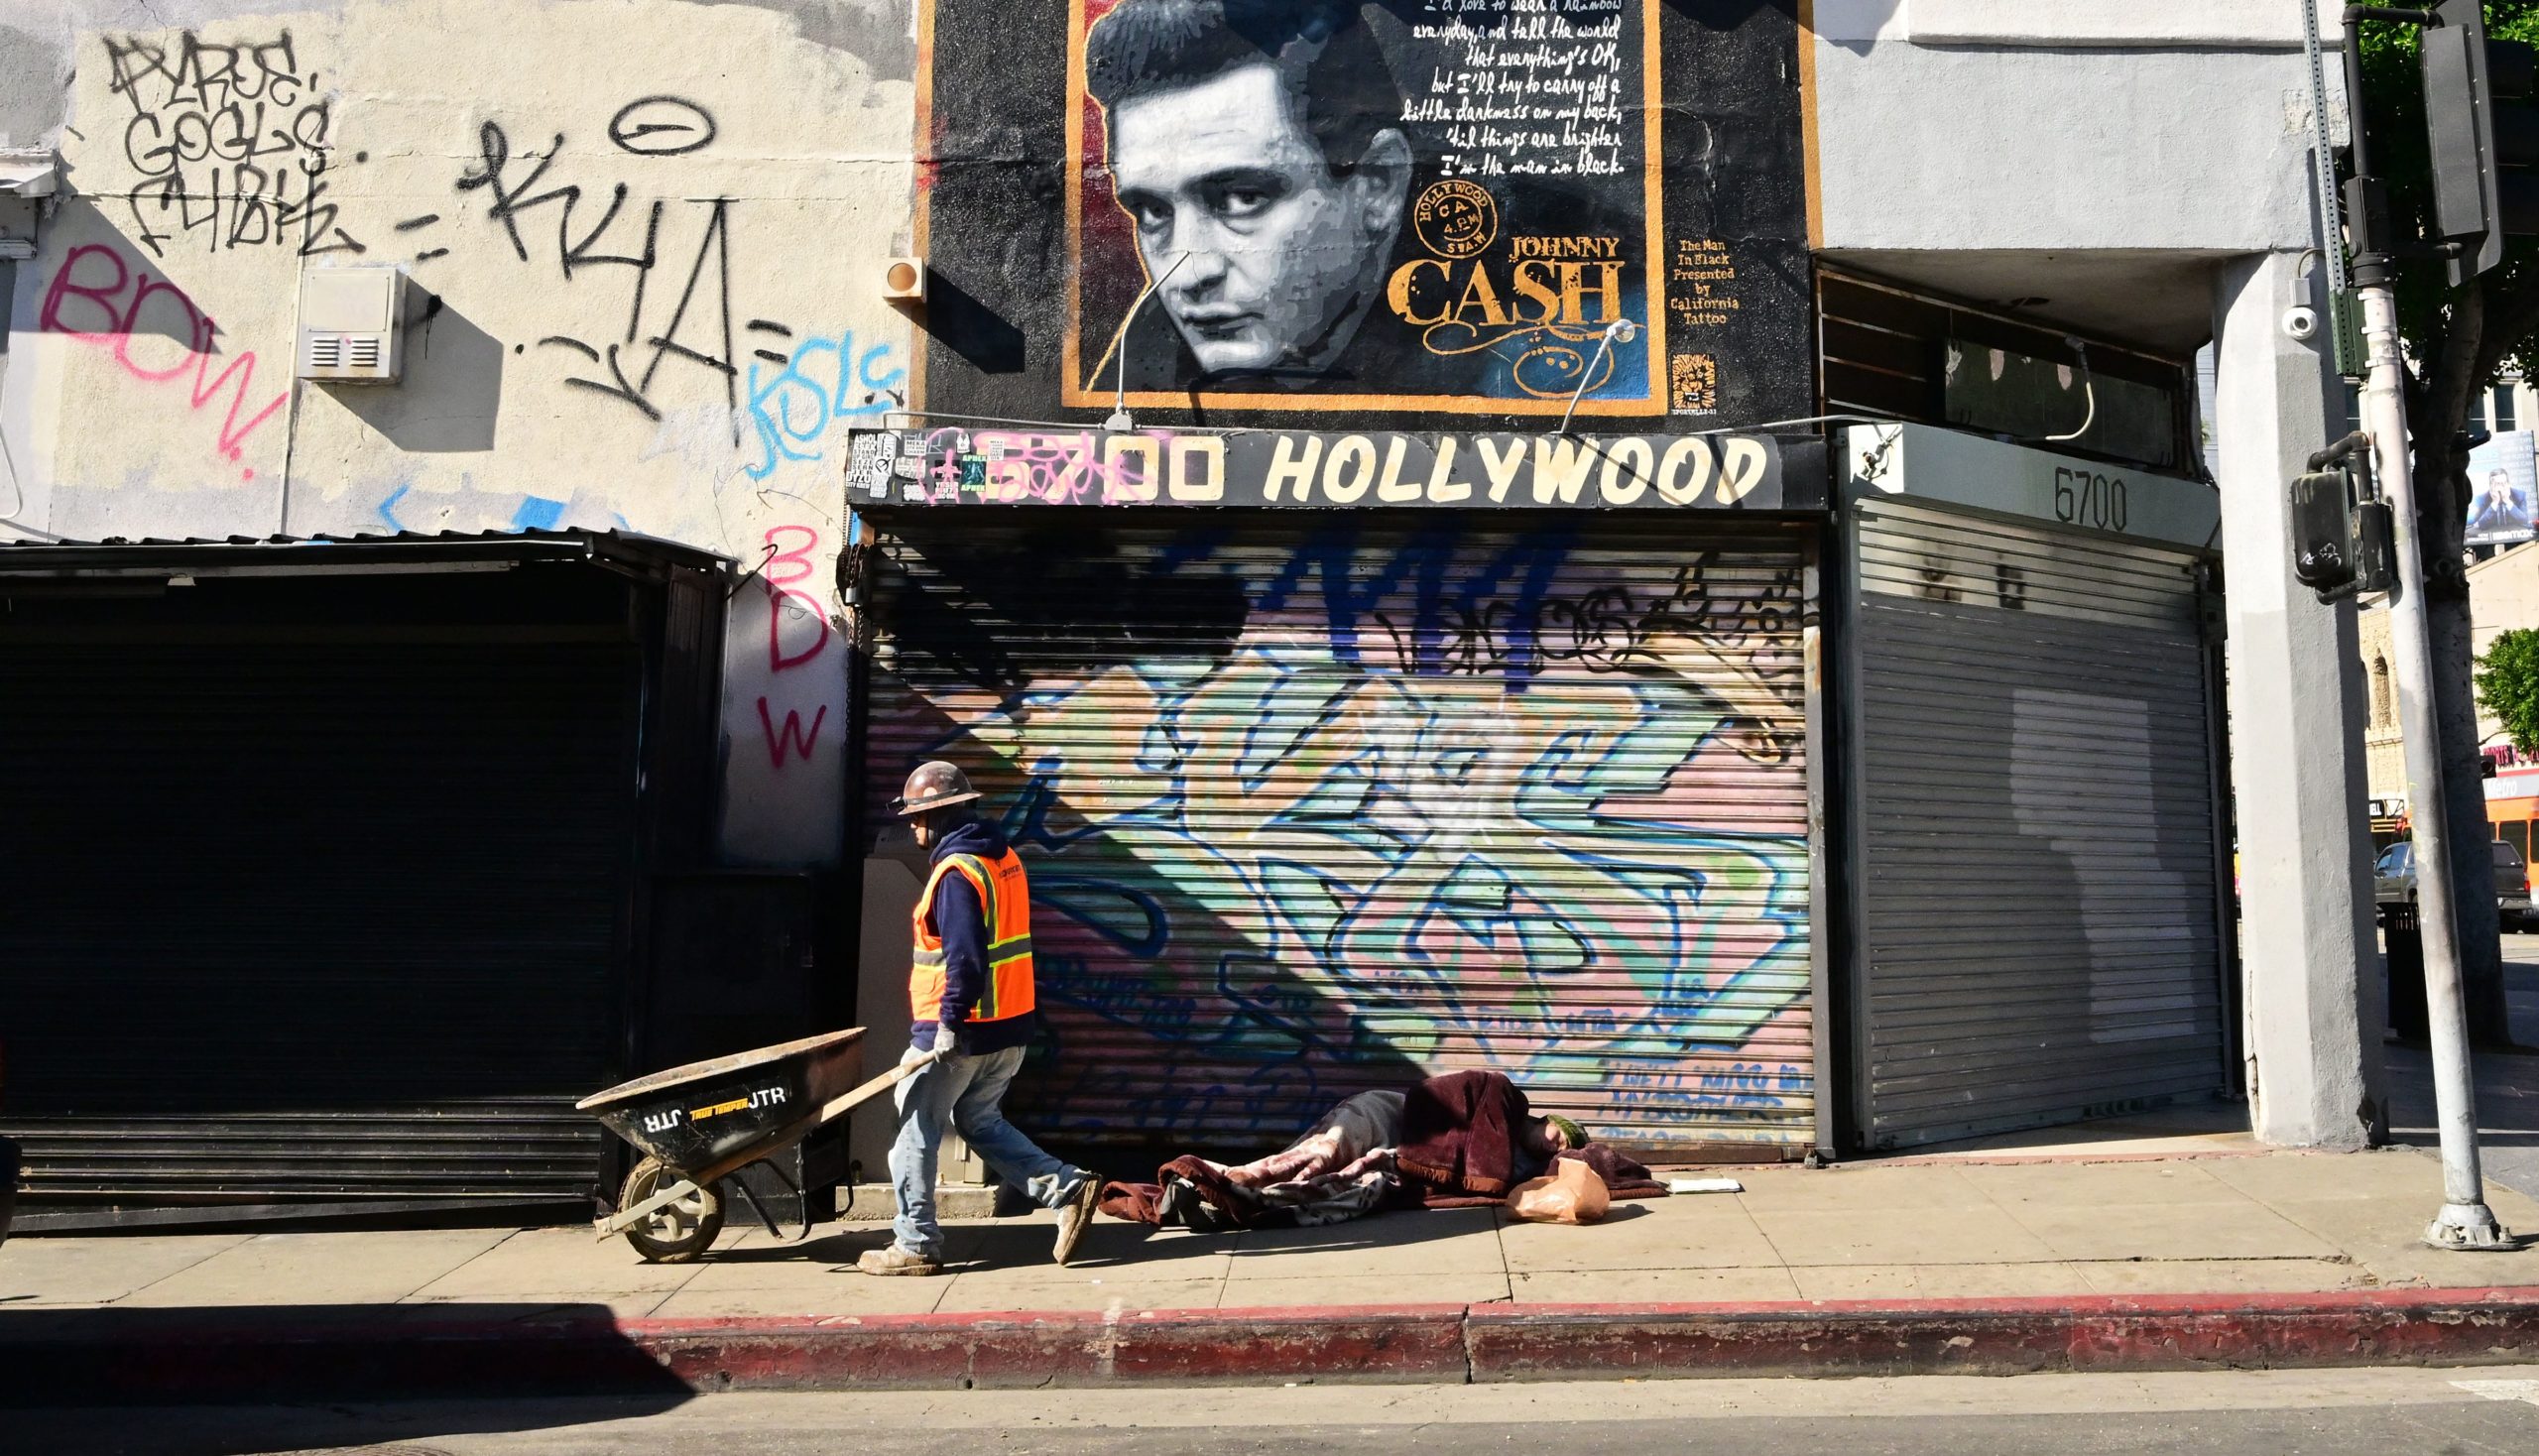 A construction worker pushes his wheelbarrow past a homeless man sleeping on a Hollywood sidewalk on January 20, 2023 in Hollywood, California. - Los Angeles County earlier this month declared a state of emergency over the region's homelessness crisis after decades of increasing numbers of people seen living on the streets.